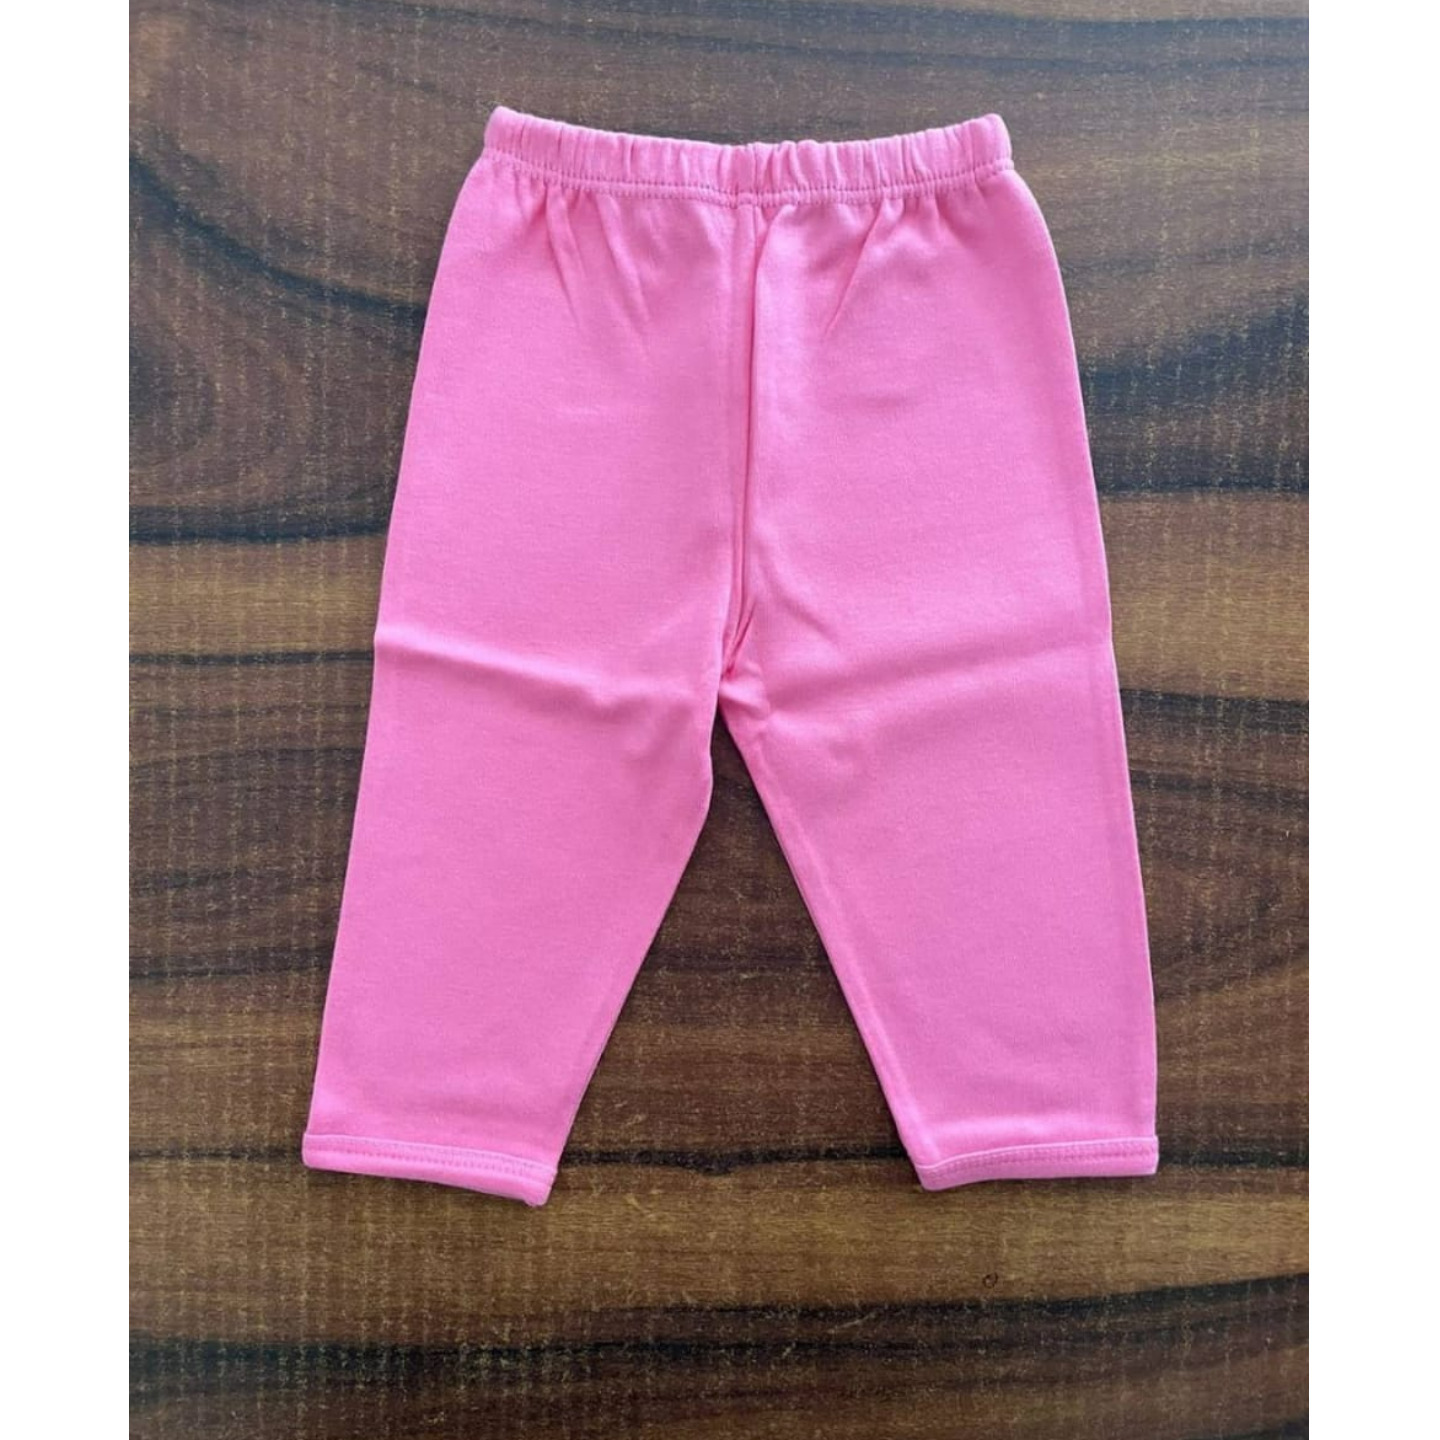 Cradle Togs Leggings Rs 165 Only 3 to 6 Months Size NewBorn baby Infant